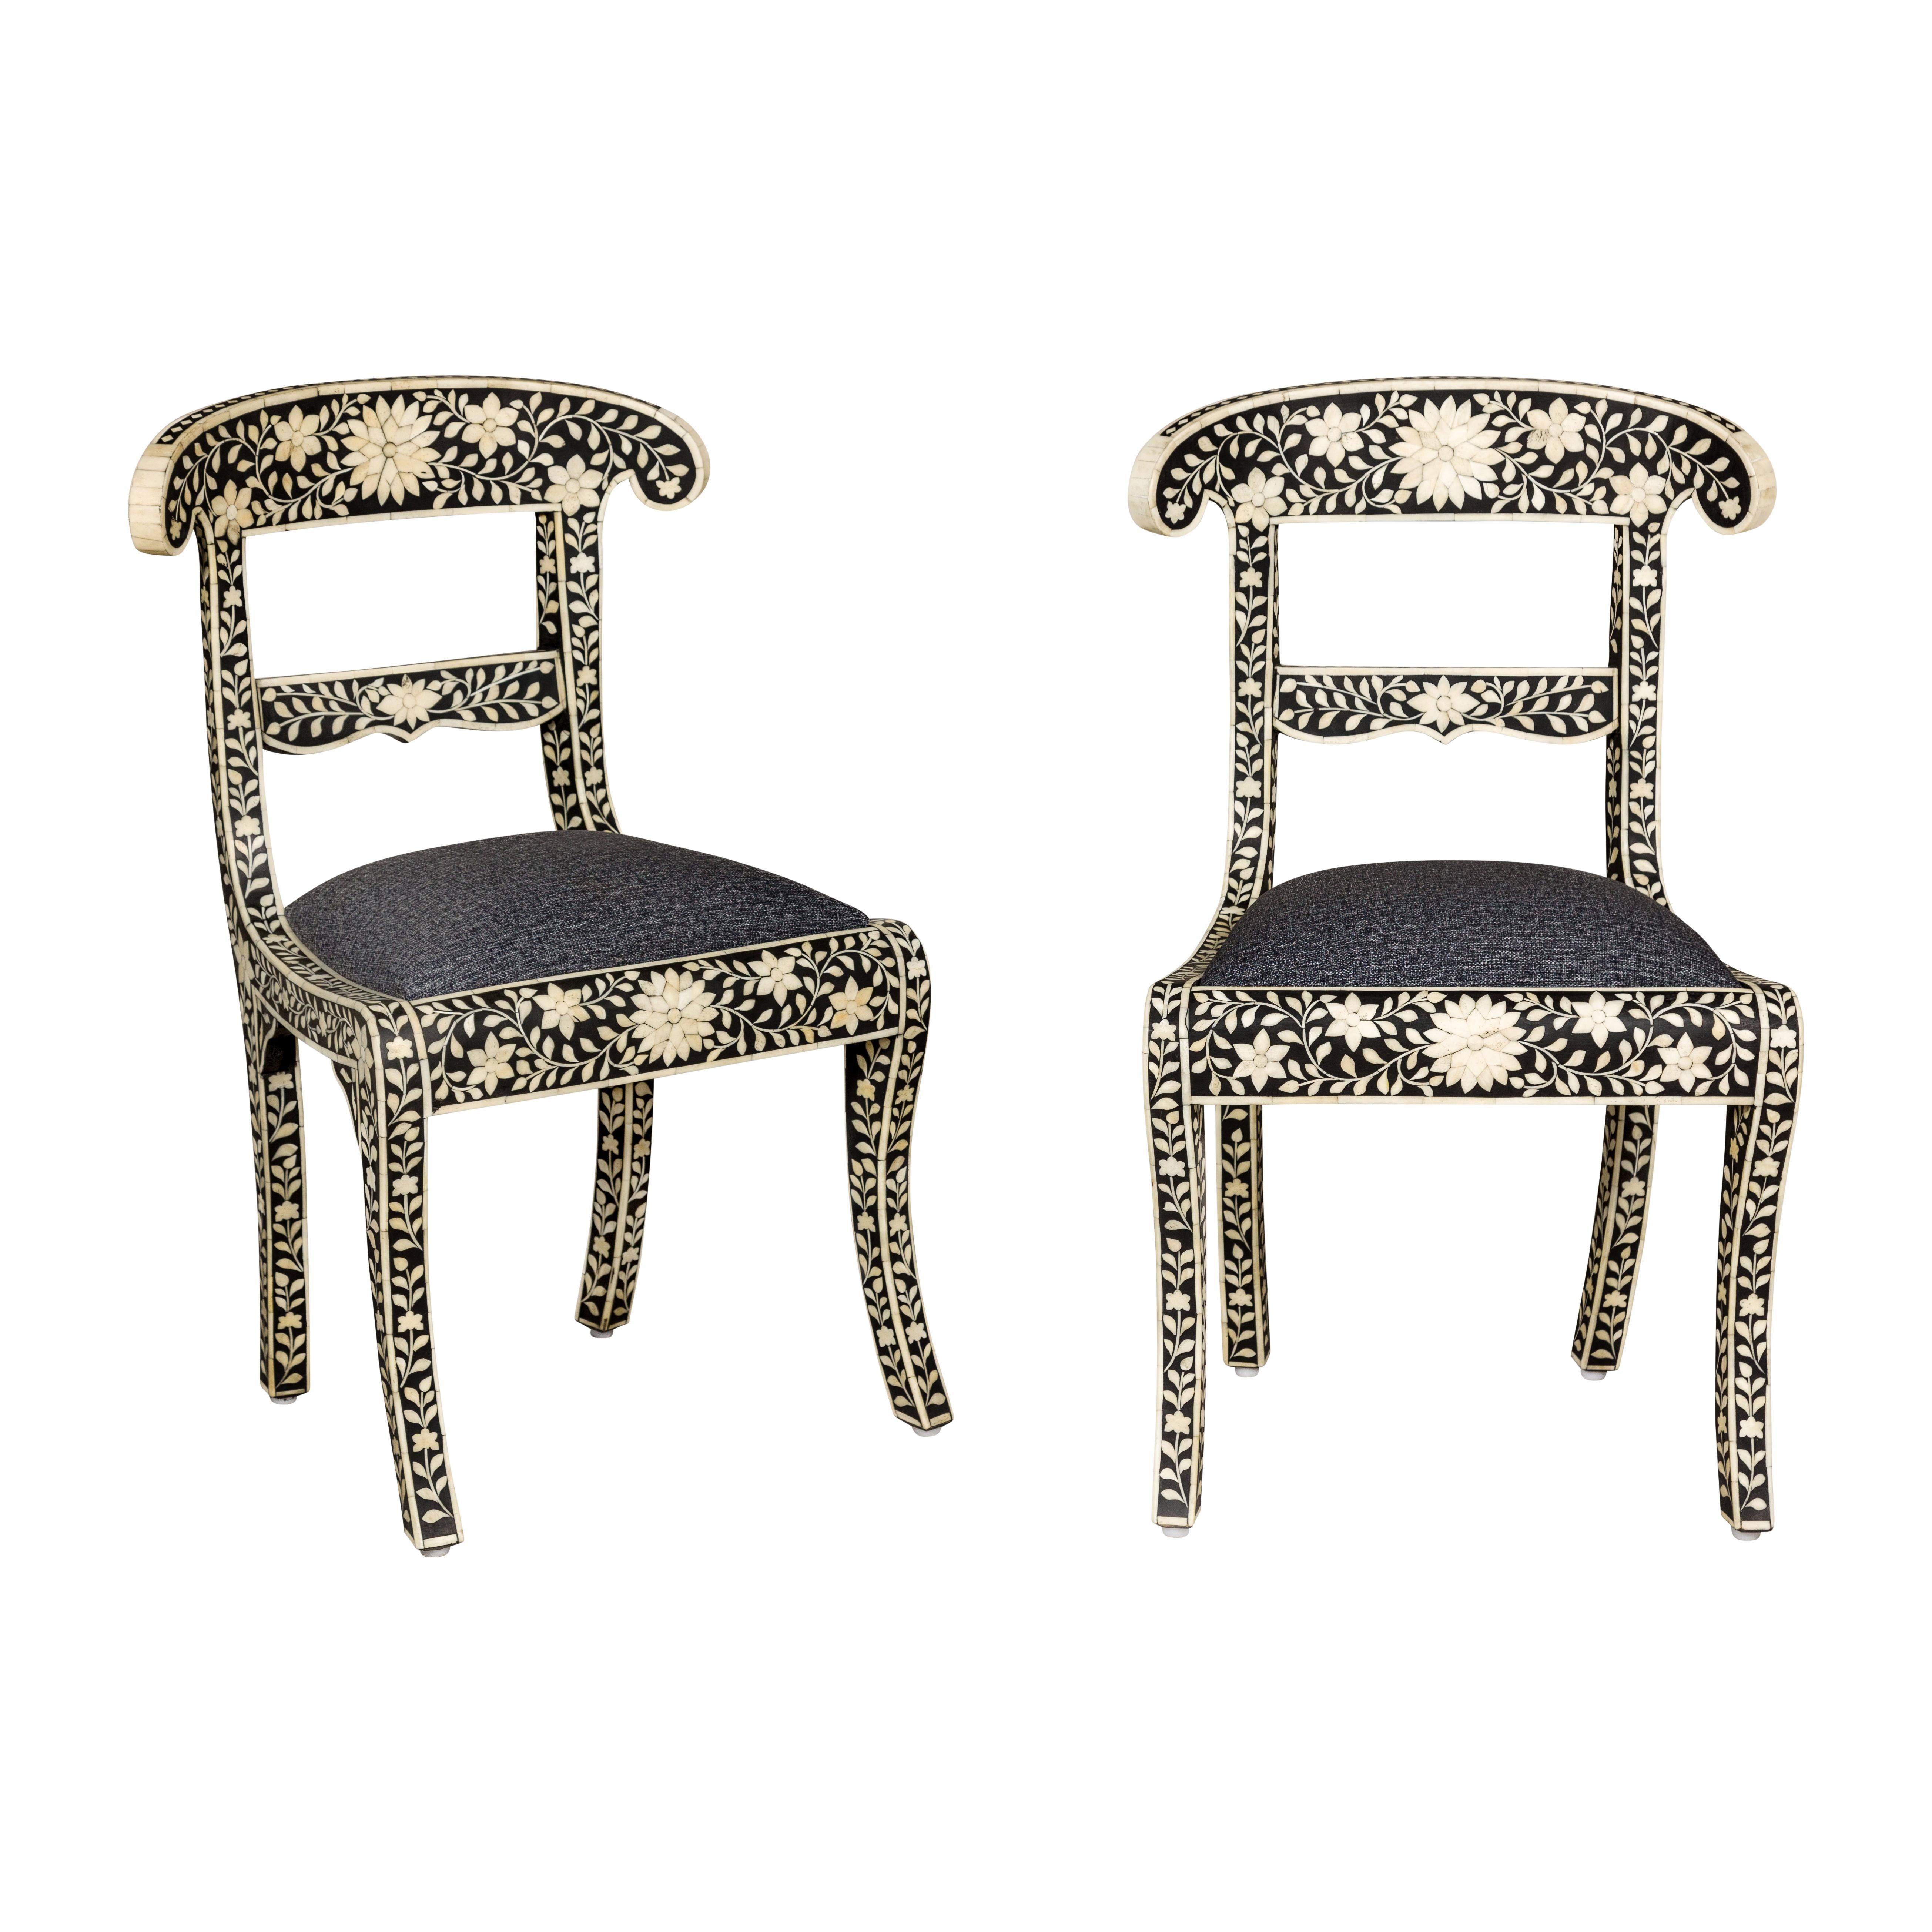 Anglo-Indian Style Ebonized Side Chairs with Floral Themed Bone Inlay, a Pair For Sale 10